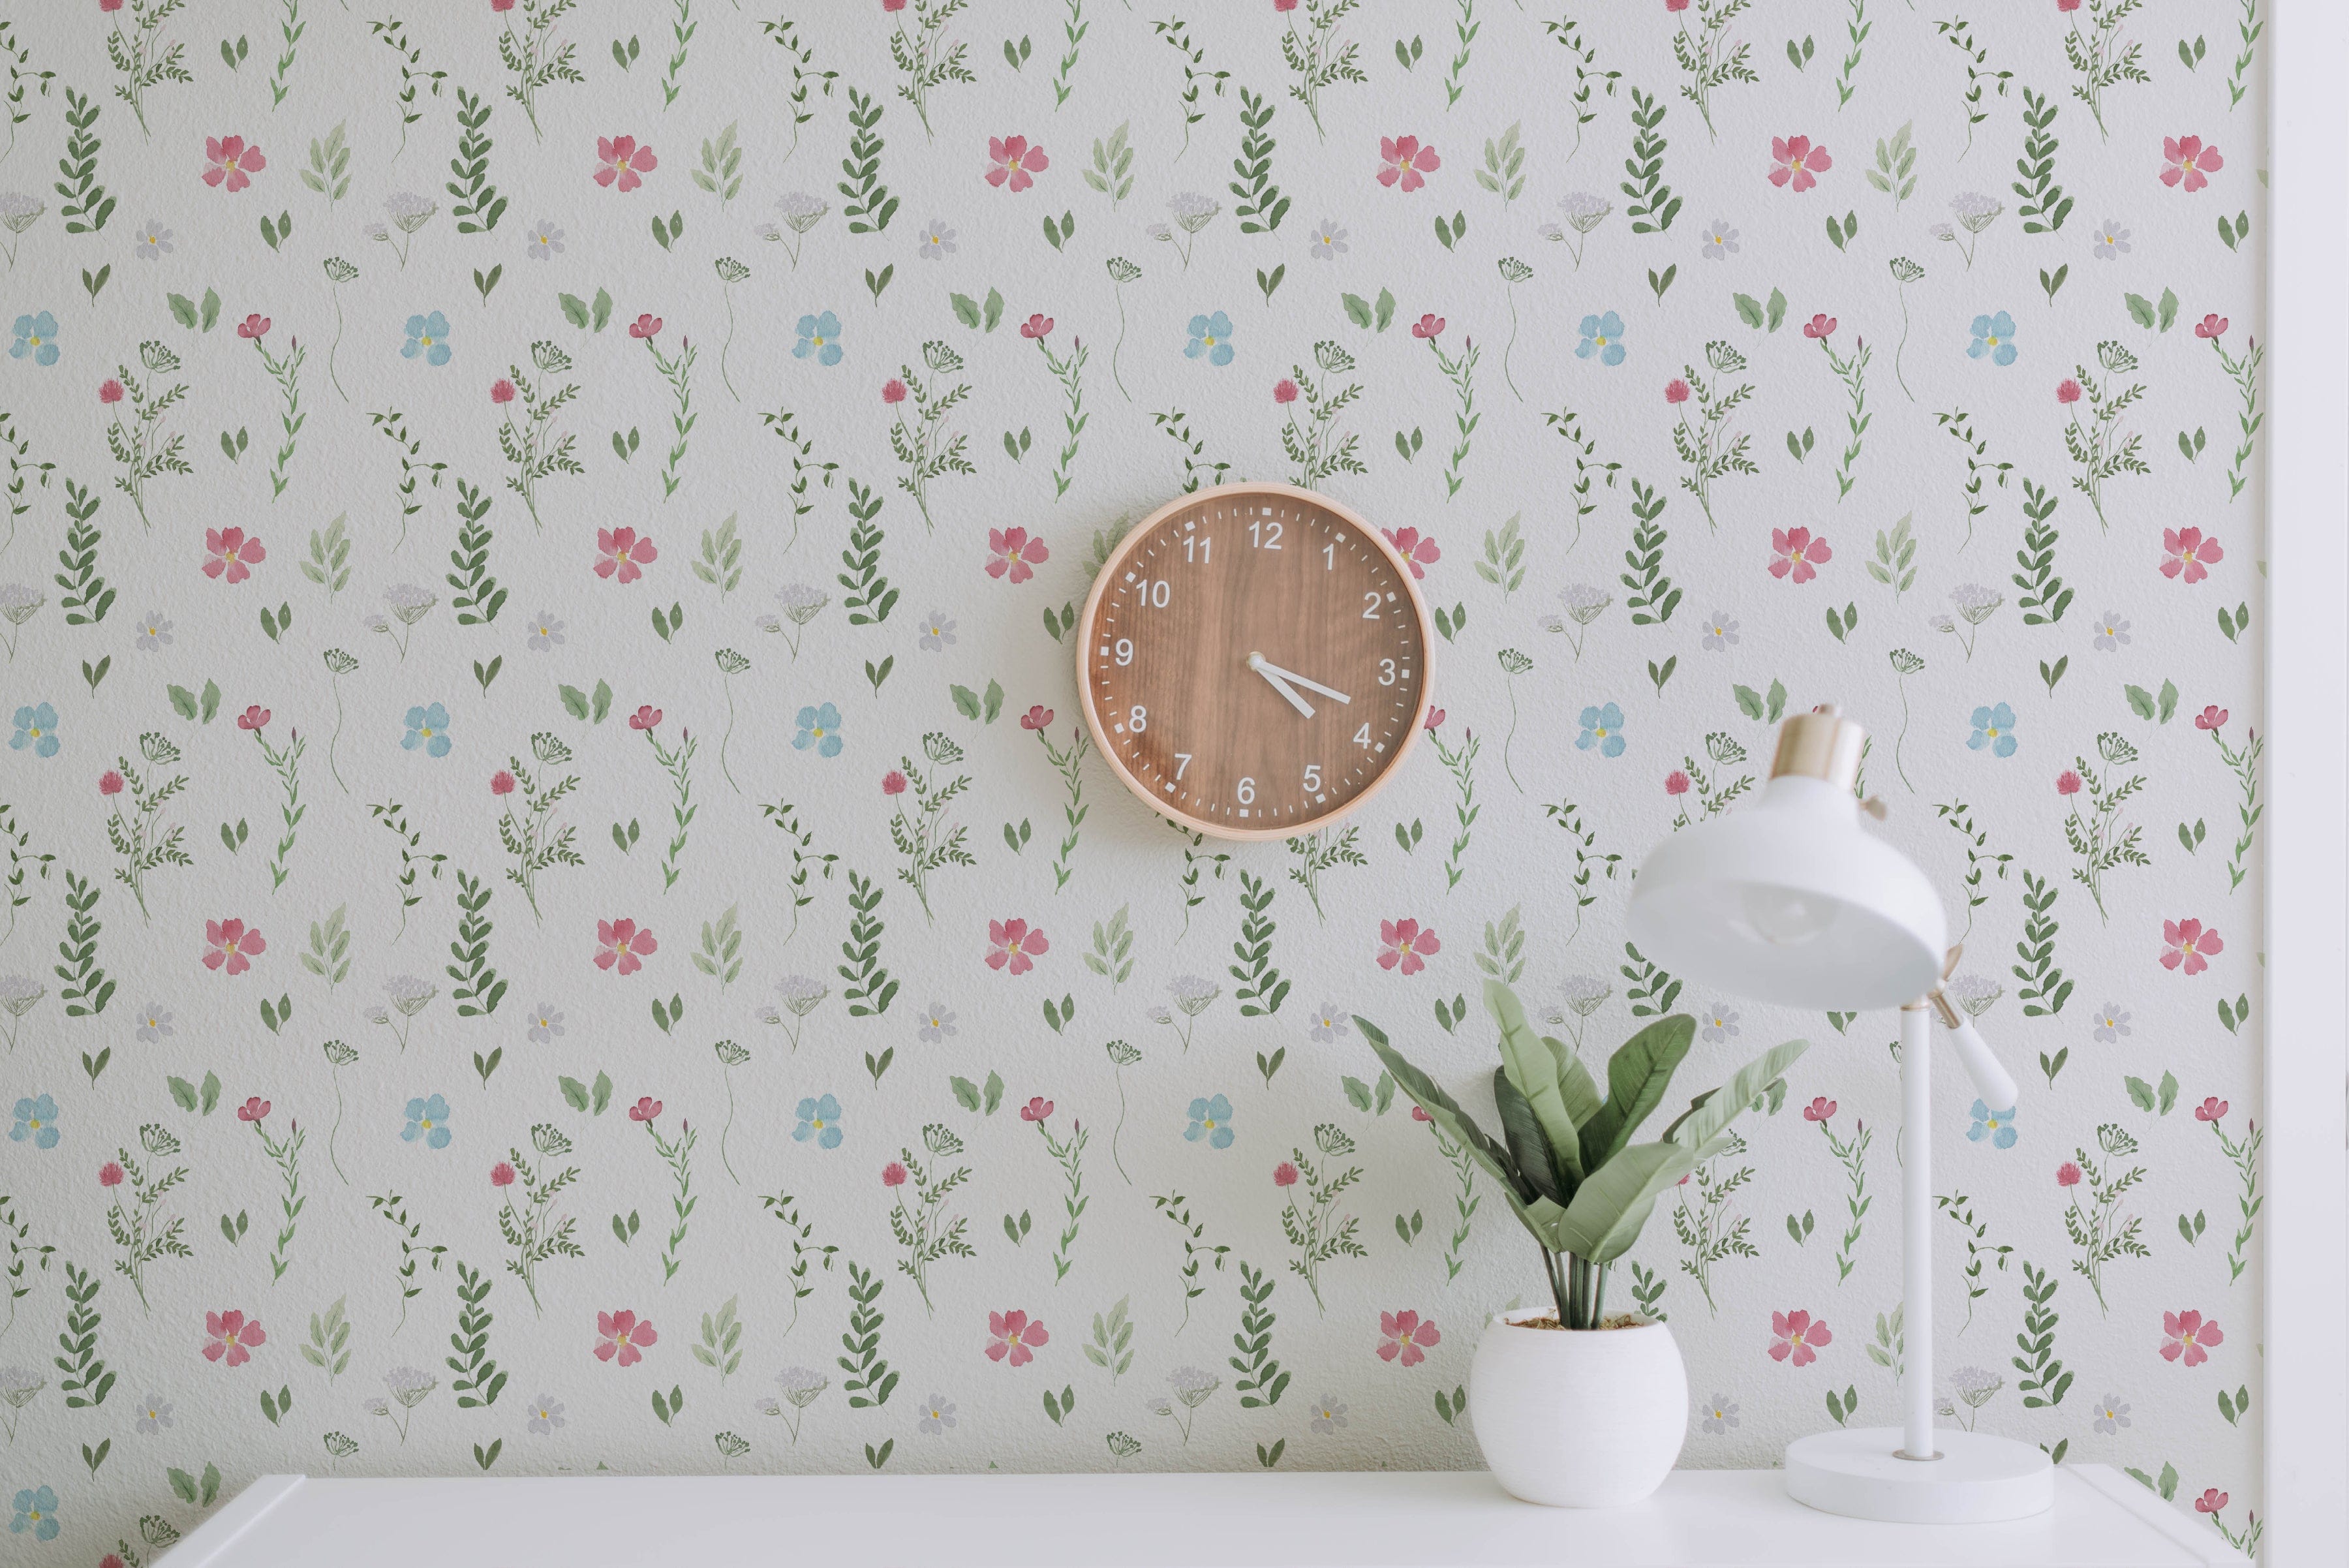 A workspace decorated with the Spring Field Wallpaper - VIII, showcasing its charming pattern of pink, blue, and yellow flowers with green foliage. The space includes a wooden wall clock and a white desk lamp beside a small plant in a white pot